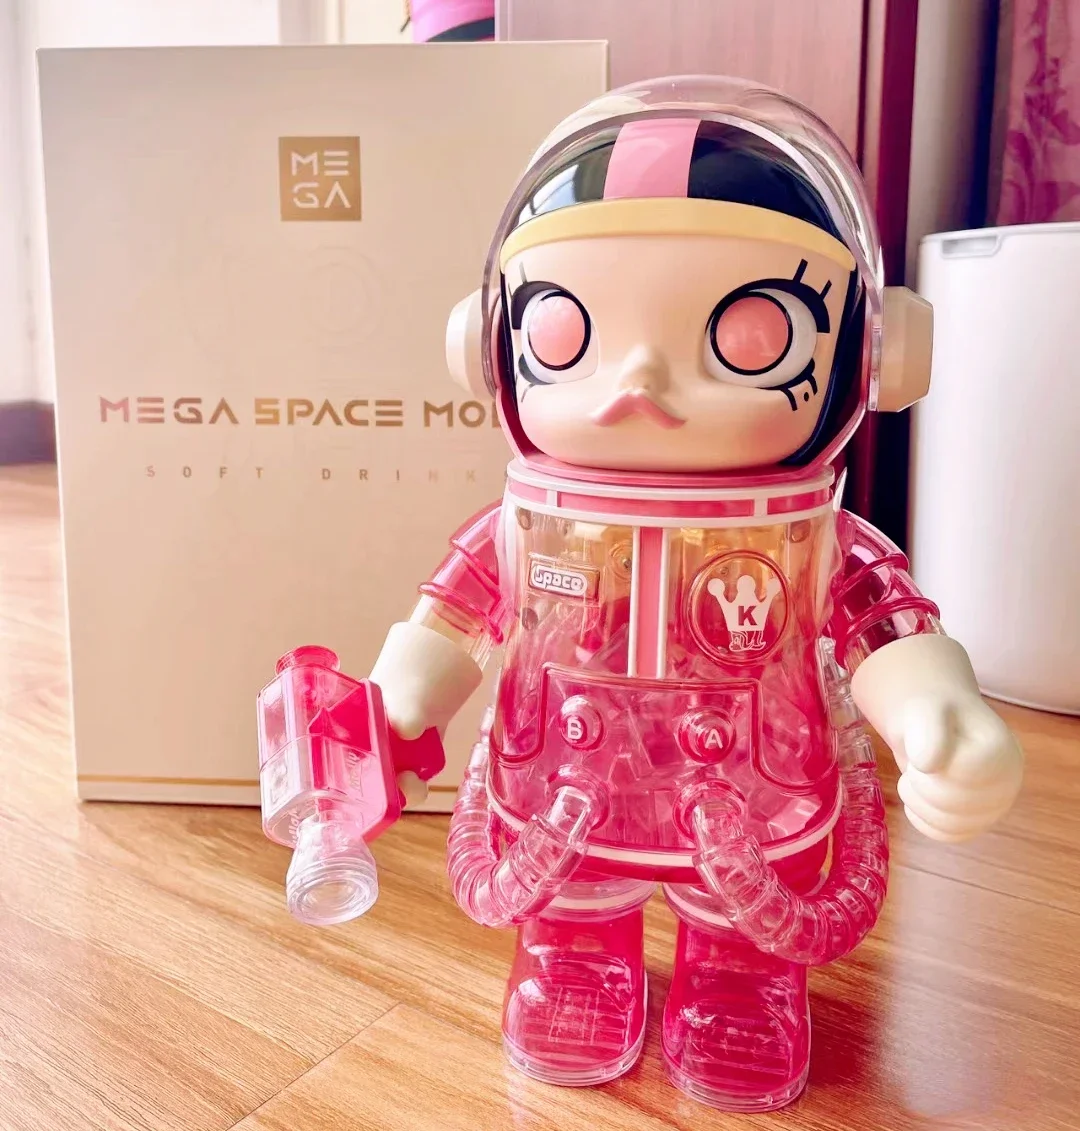 

Original Mega Space MOLLY 400% Collection Soft Drinks Series Astronaut Molly Extra Figure Spring Paradise Collection House Decor